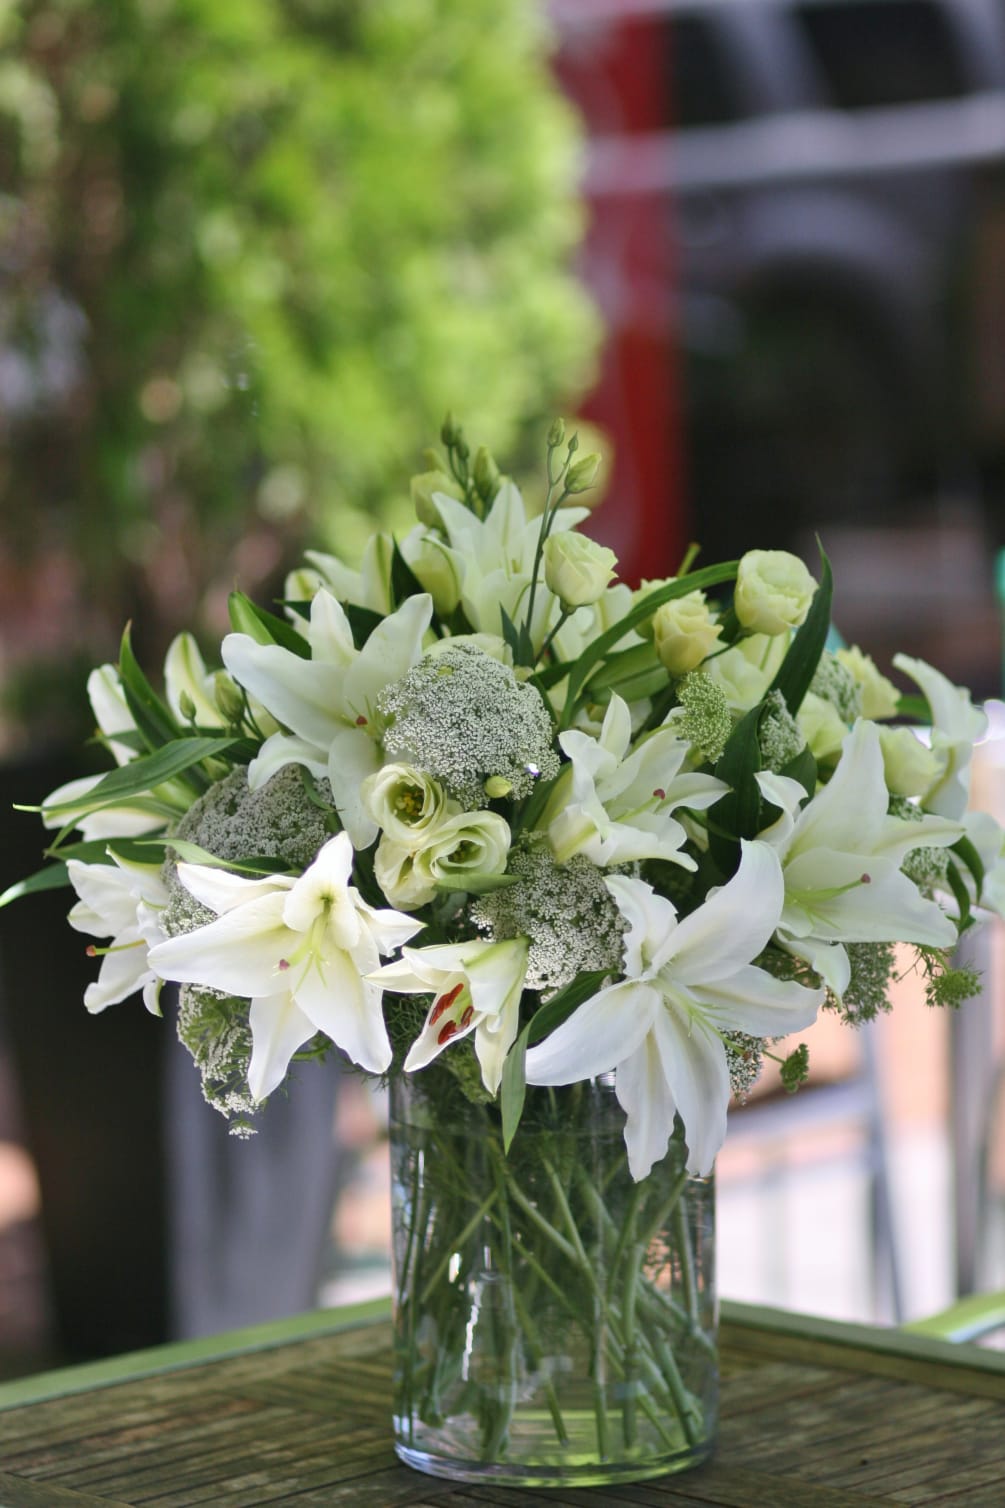 Nice mixture of white flowers - pure white elegant arrangement for all